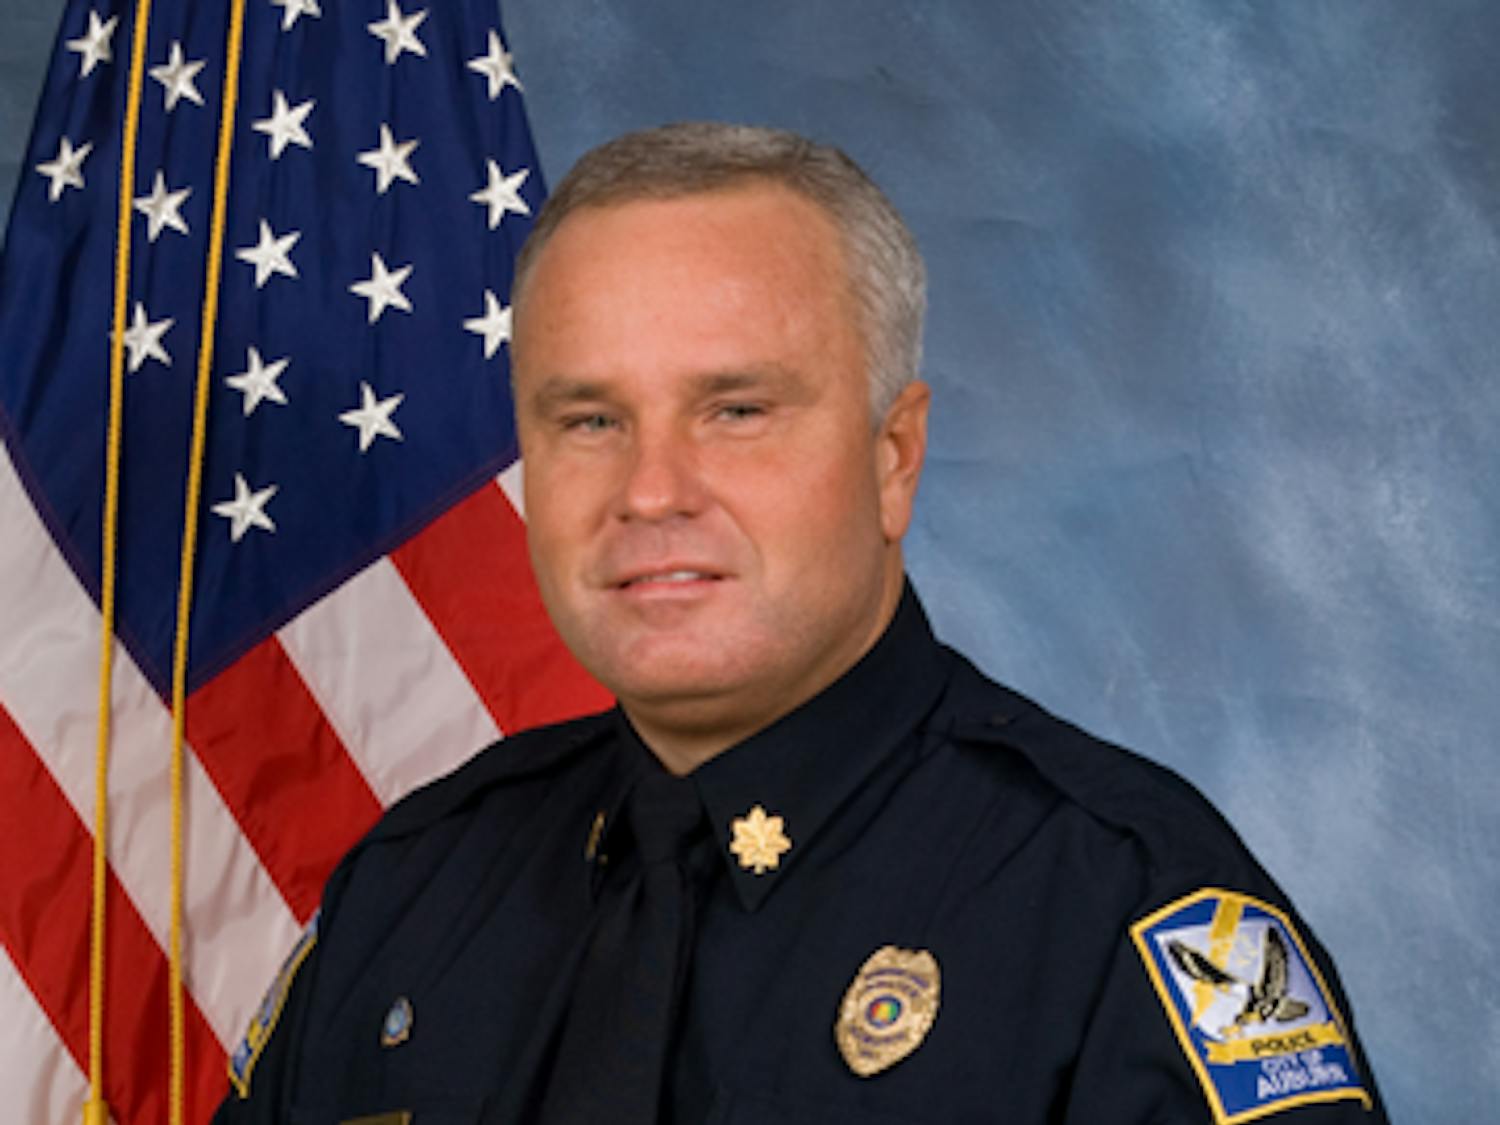 Sunday, July 15 marked the 25th anniversary of Dawson's first day as a police officer. (Courtesy of auburnalabama.org)